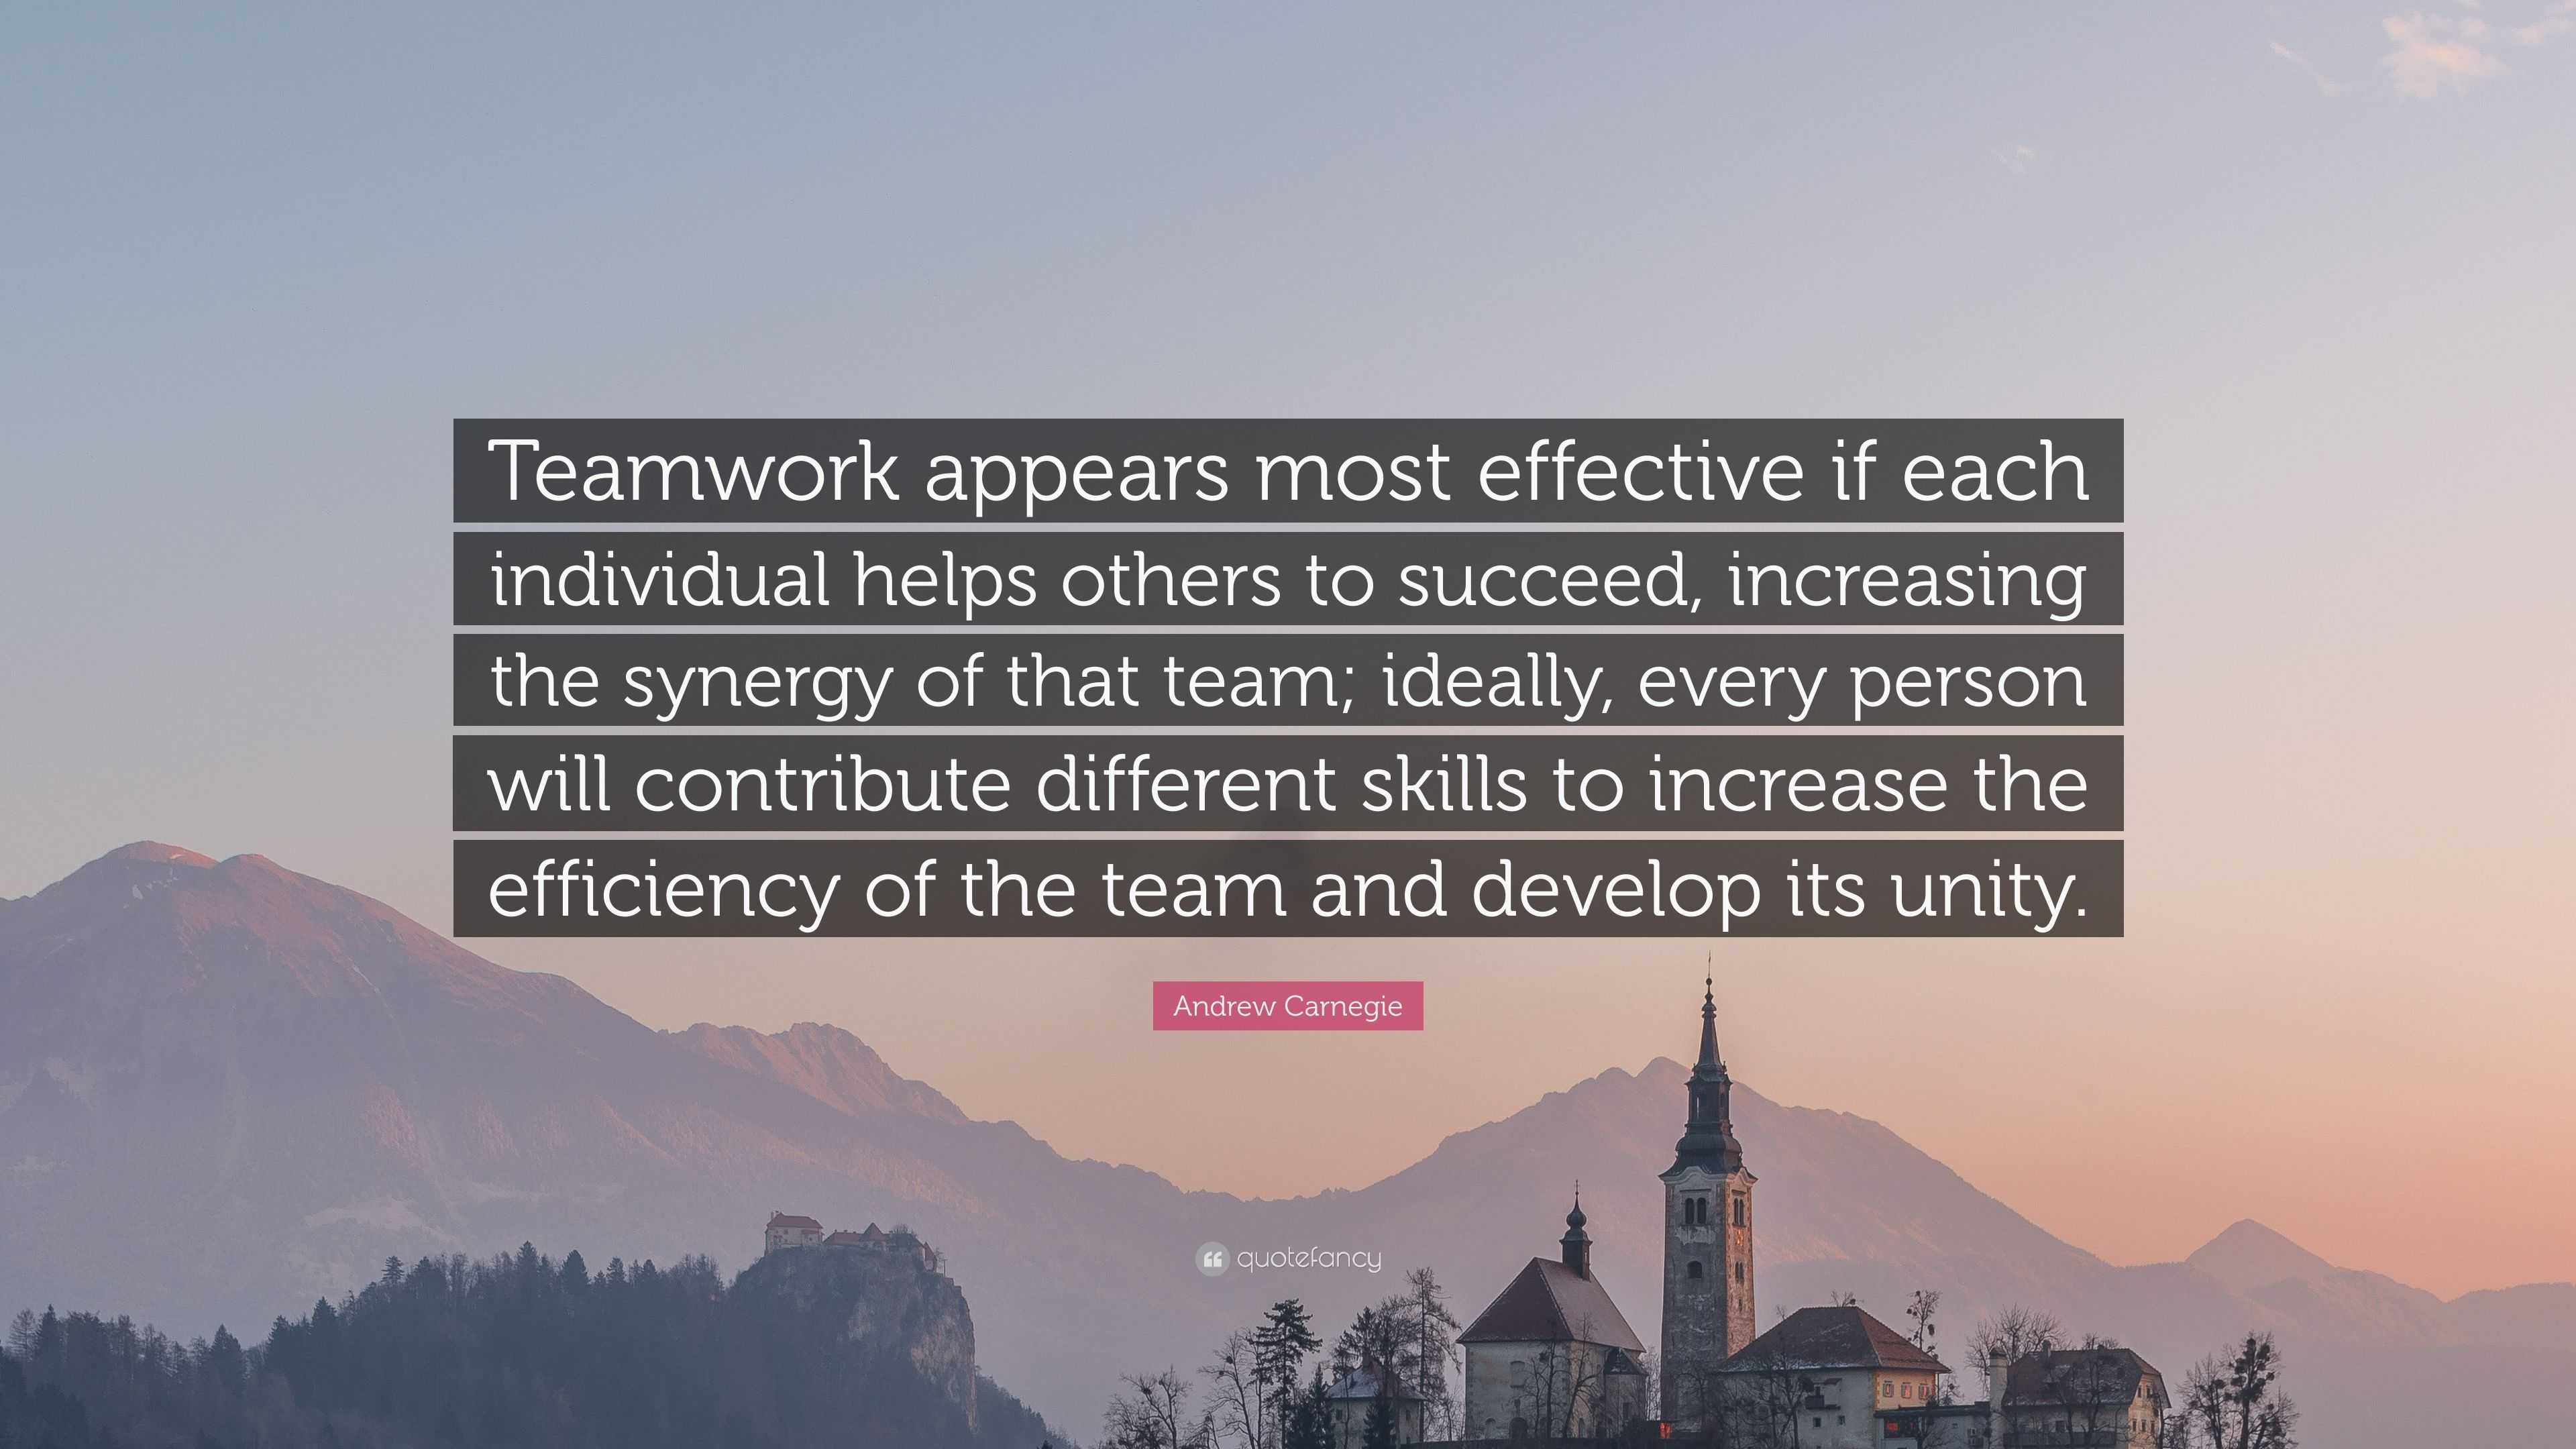 Andrew Carnegie Quote: “Teamwork appears most effective if each